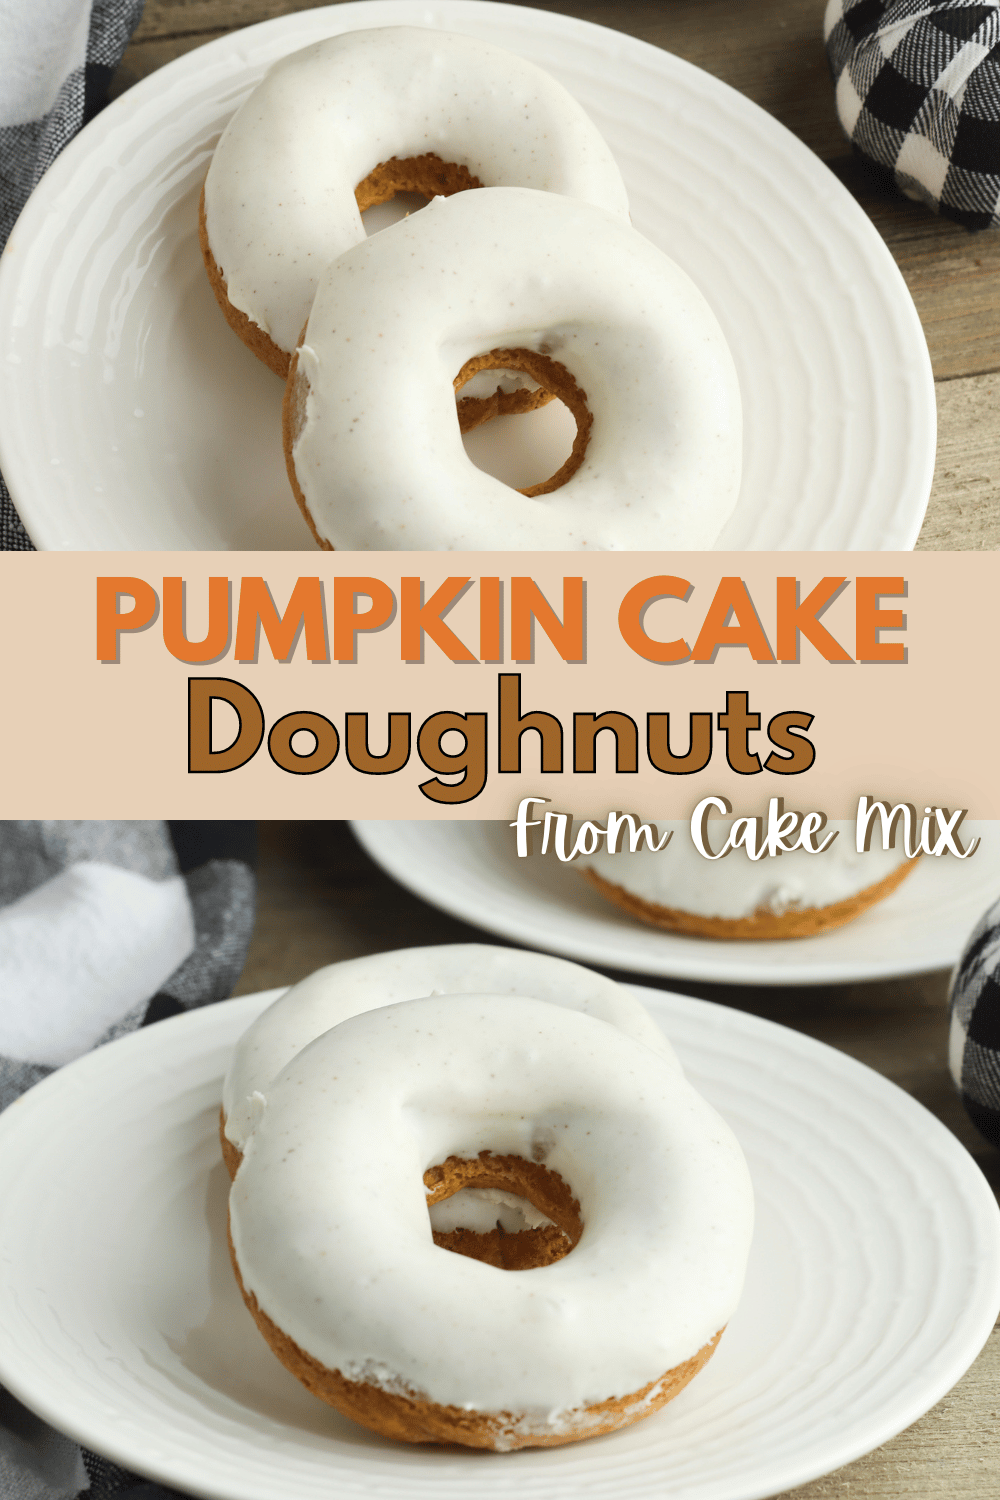 These Pumpkin Cake Doughnuts are an easy and delicious fall breakfast or snack! Made with a cake mix, they are super simple to make. #pumpkincakedoughnuts #pumpkin #doughnuts #donuts #Fall via @wondermomwannab